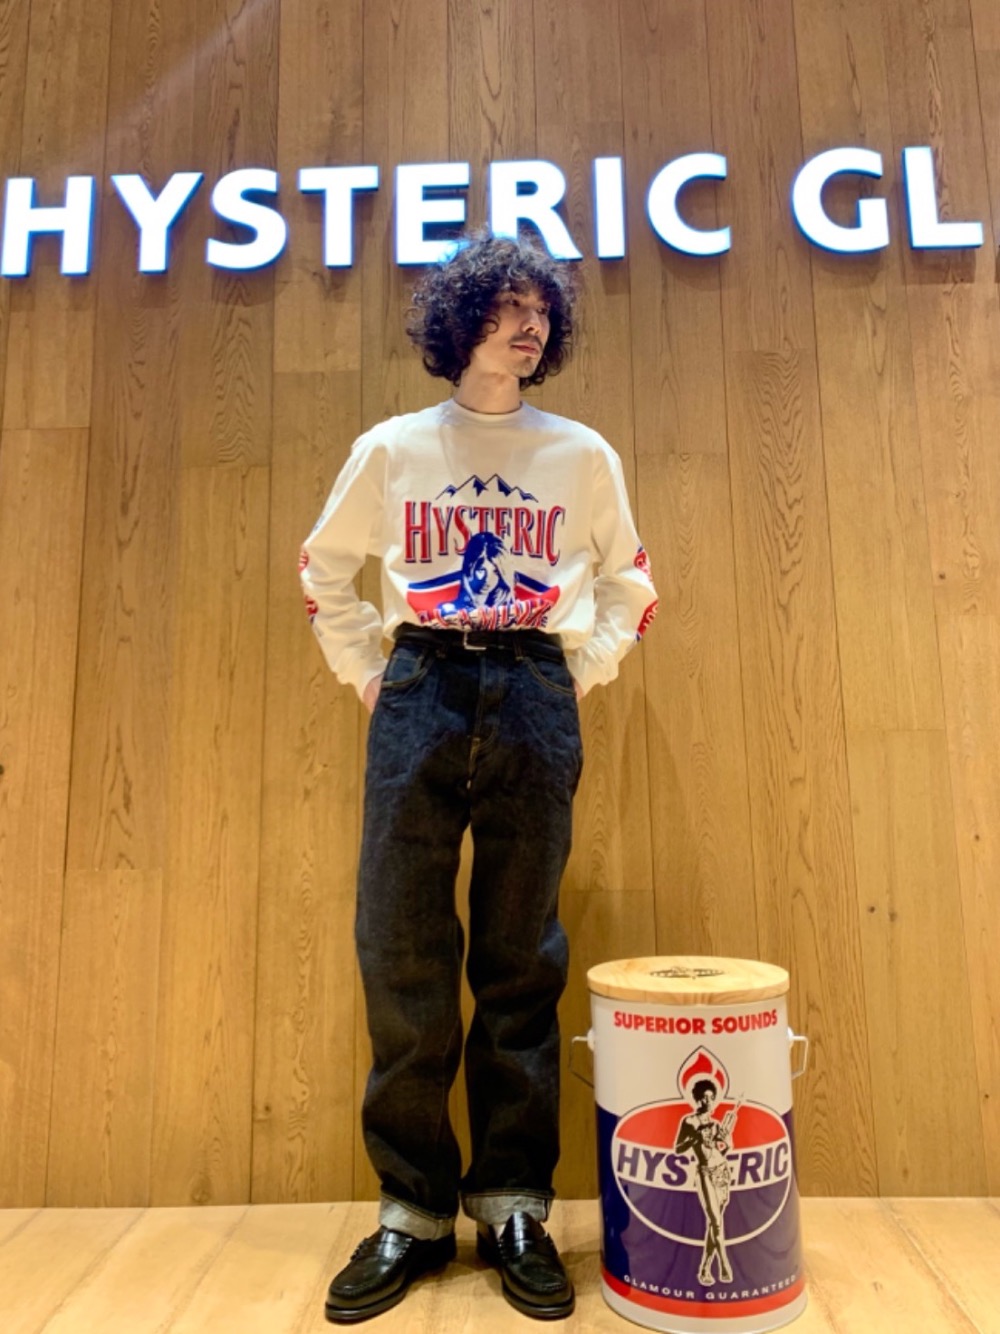 HYSTERIC GLAMOURマロニエゲート銀座1店ikechan / HYSTERIC GLAMOUR 